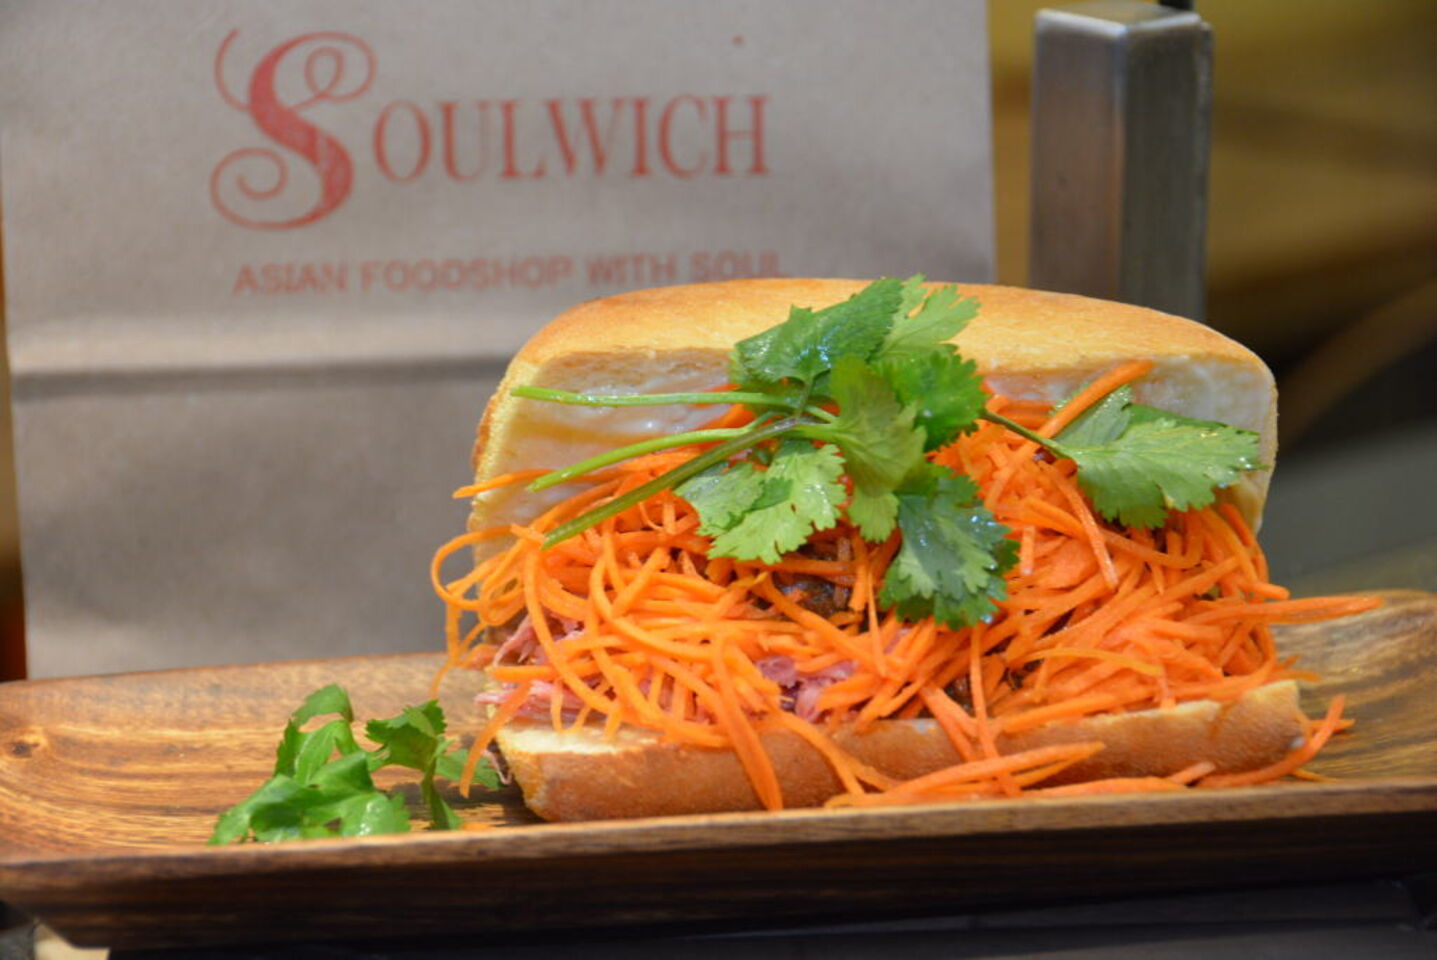 A photo of Soulwich